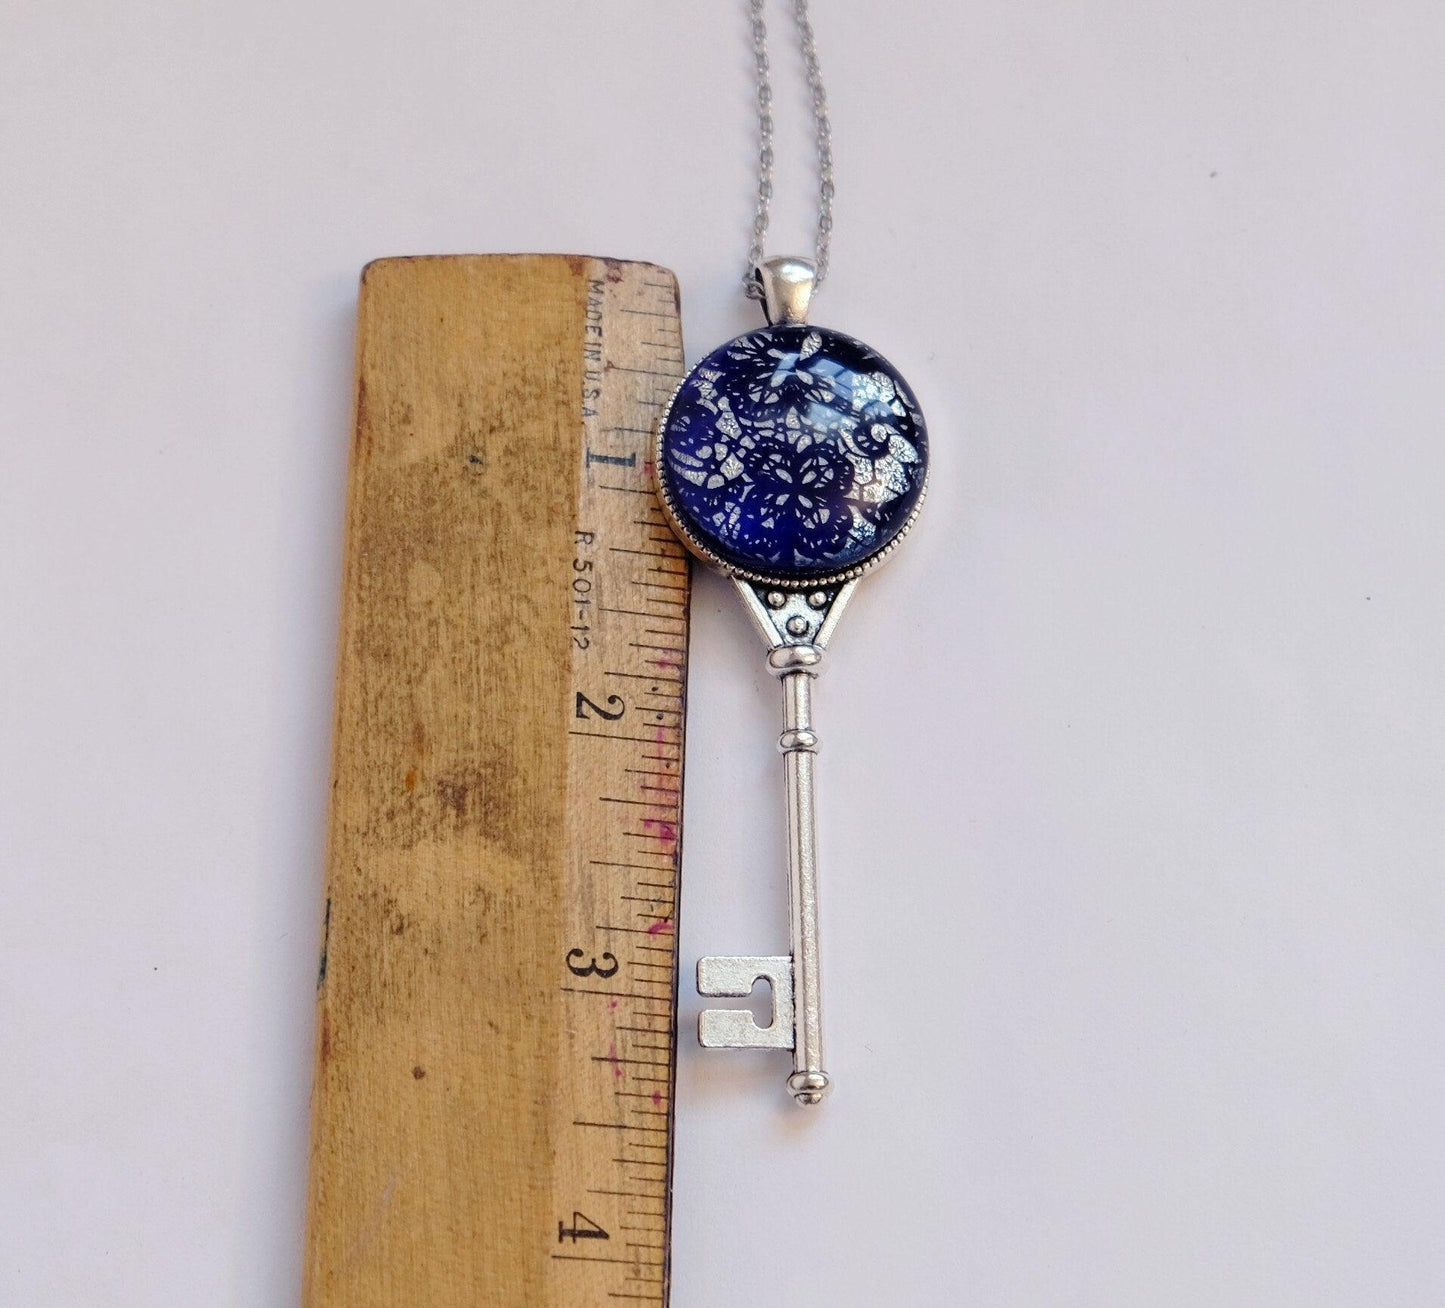 Silver tone Skeleton Key pendant necklace with Fused Glass blue and silver dichroic Lace cabochon on 24 inch steel chain jewelry